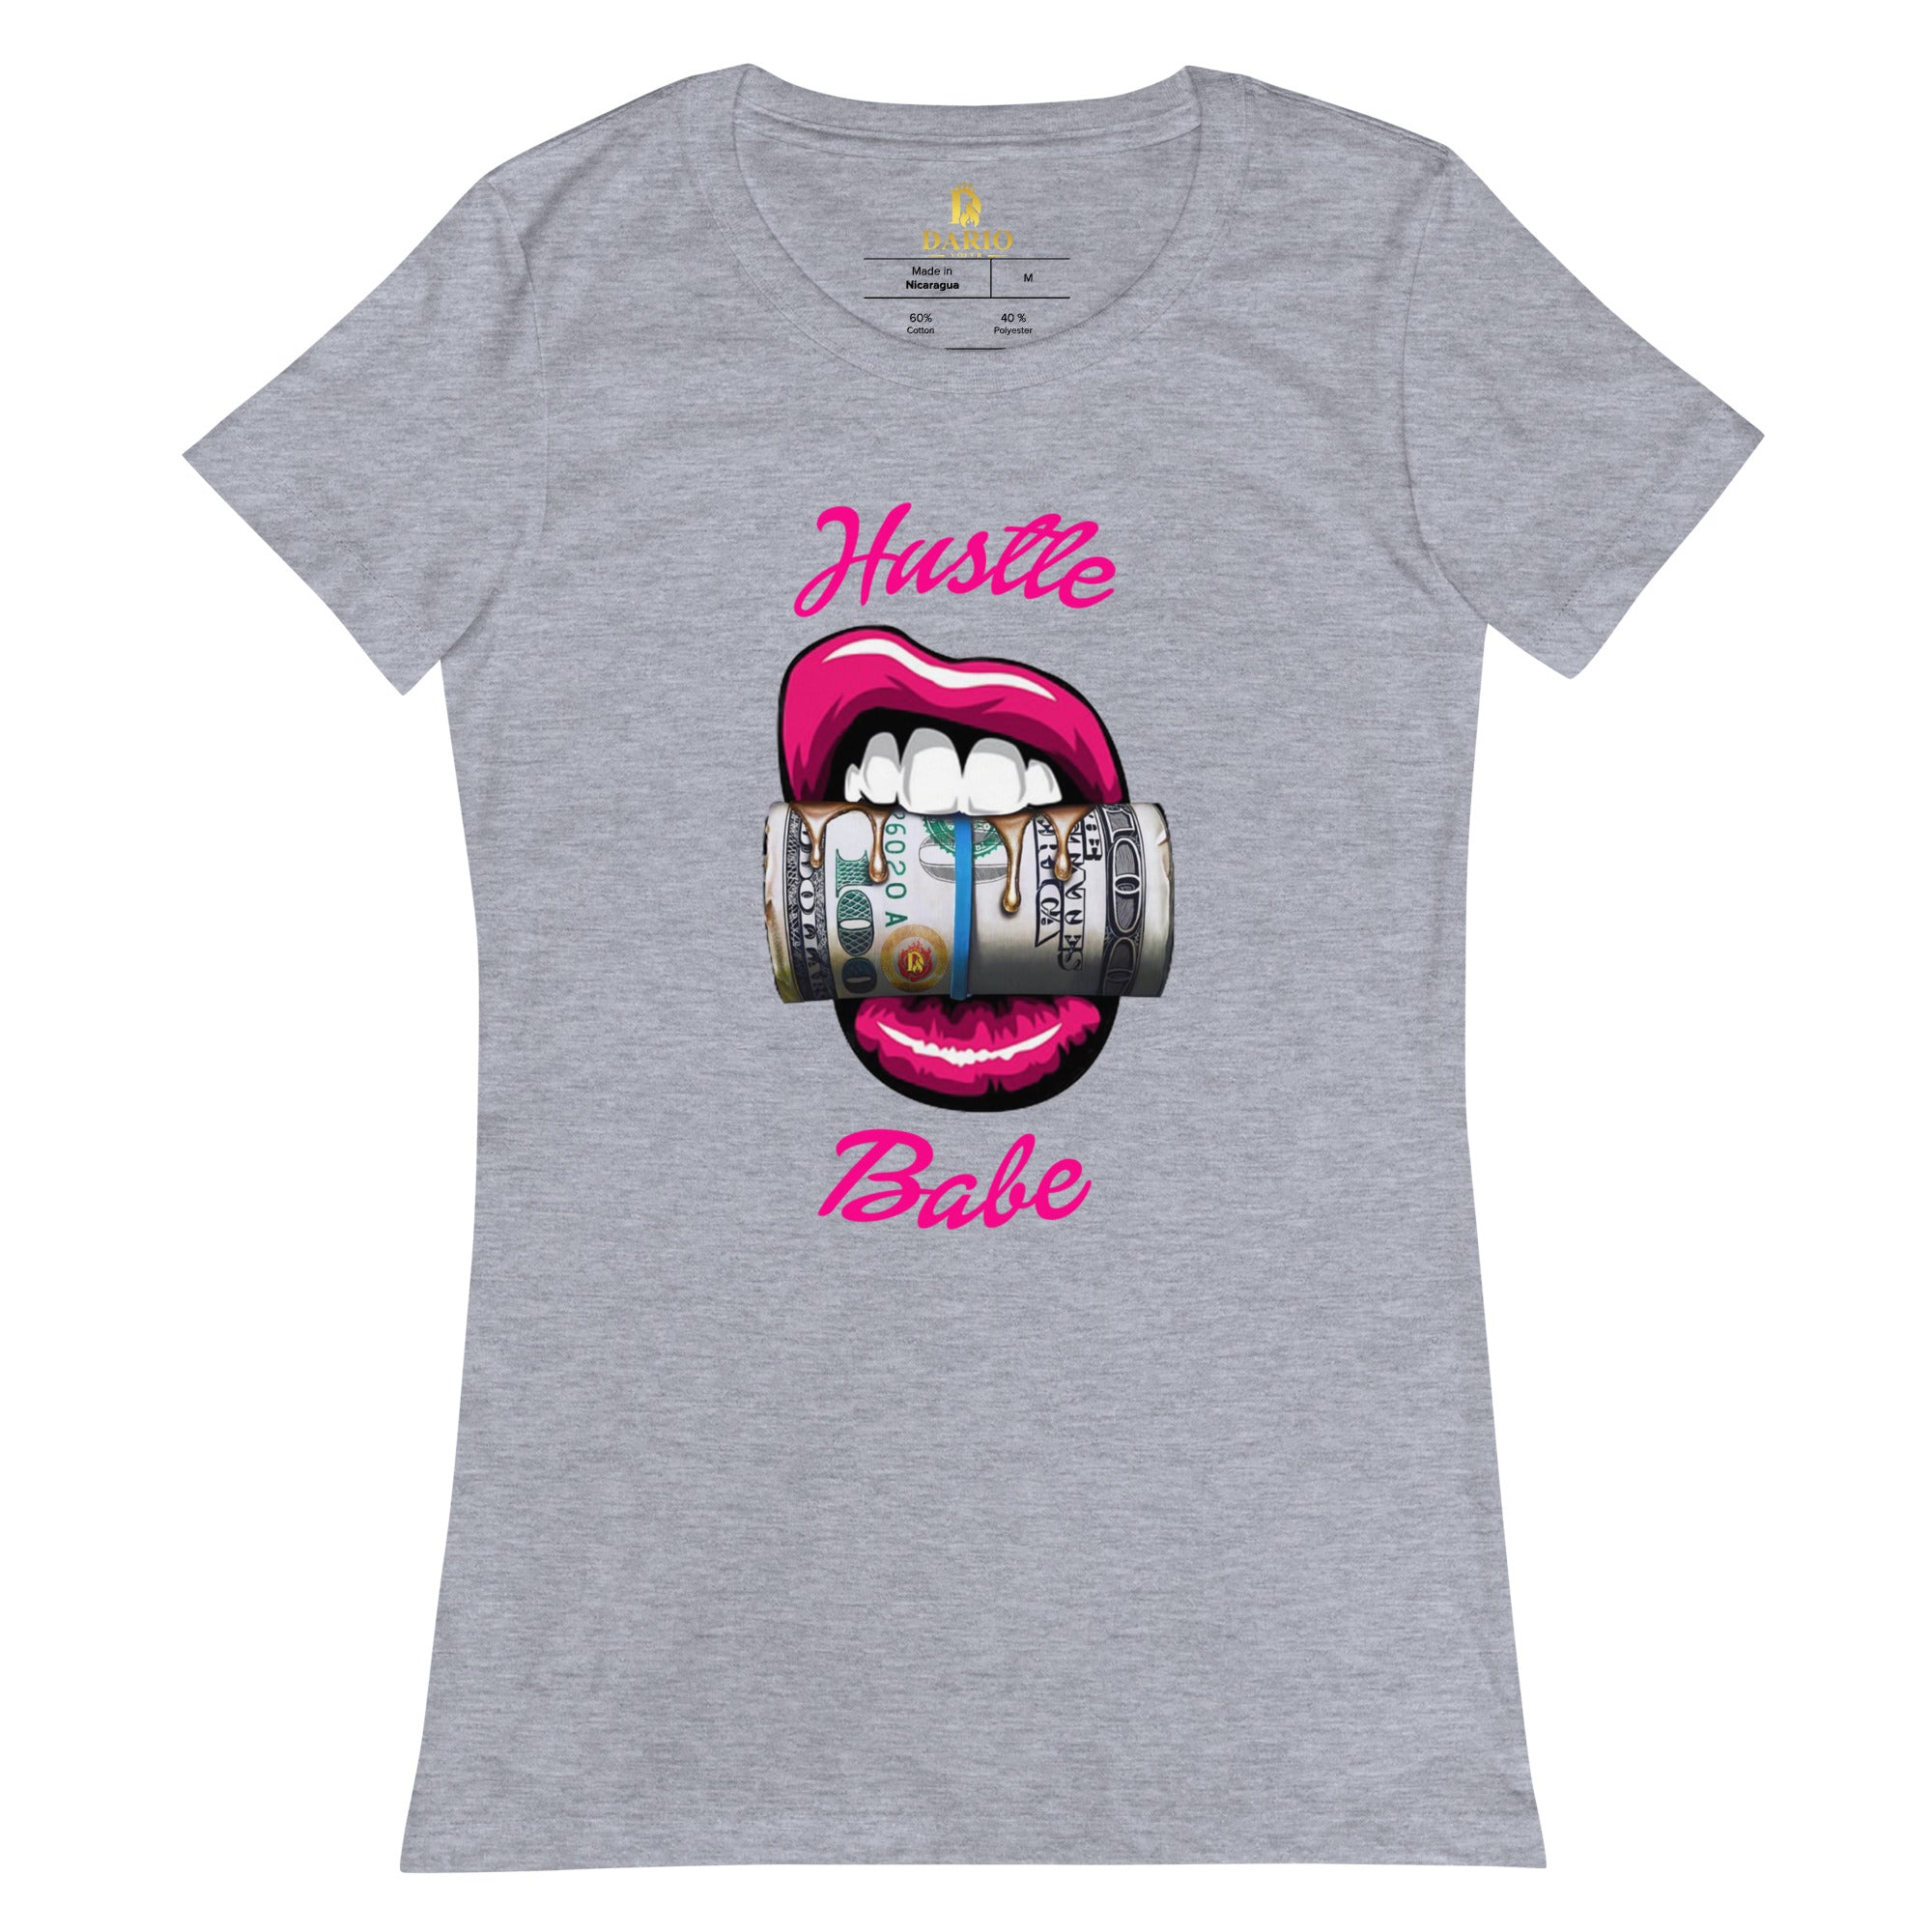 Women’s fitted Hustle Babe Pink Tee